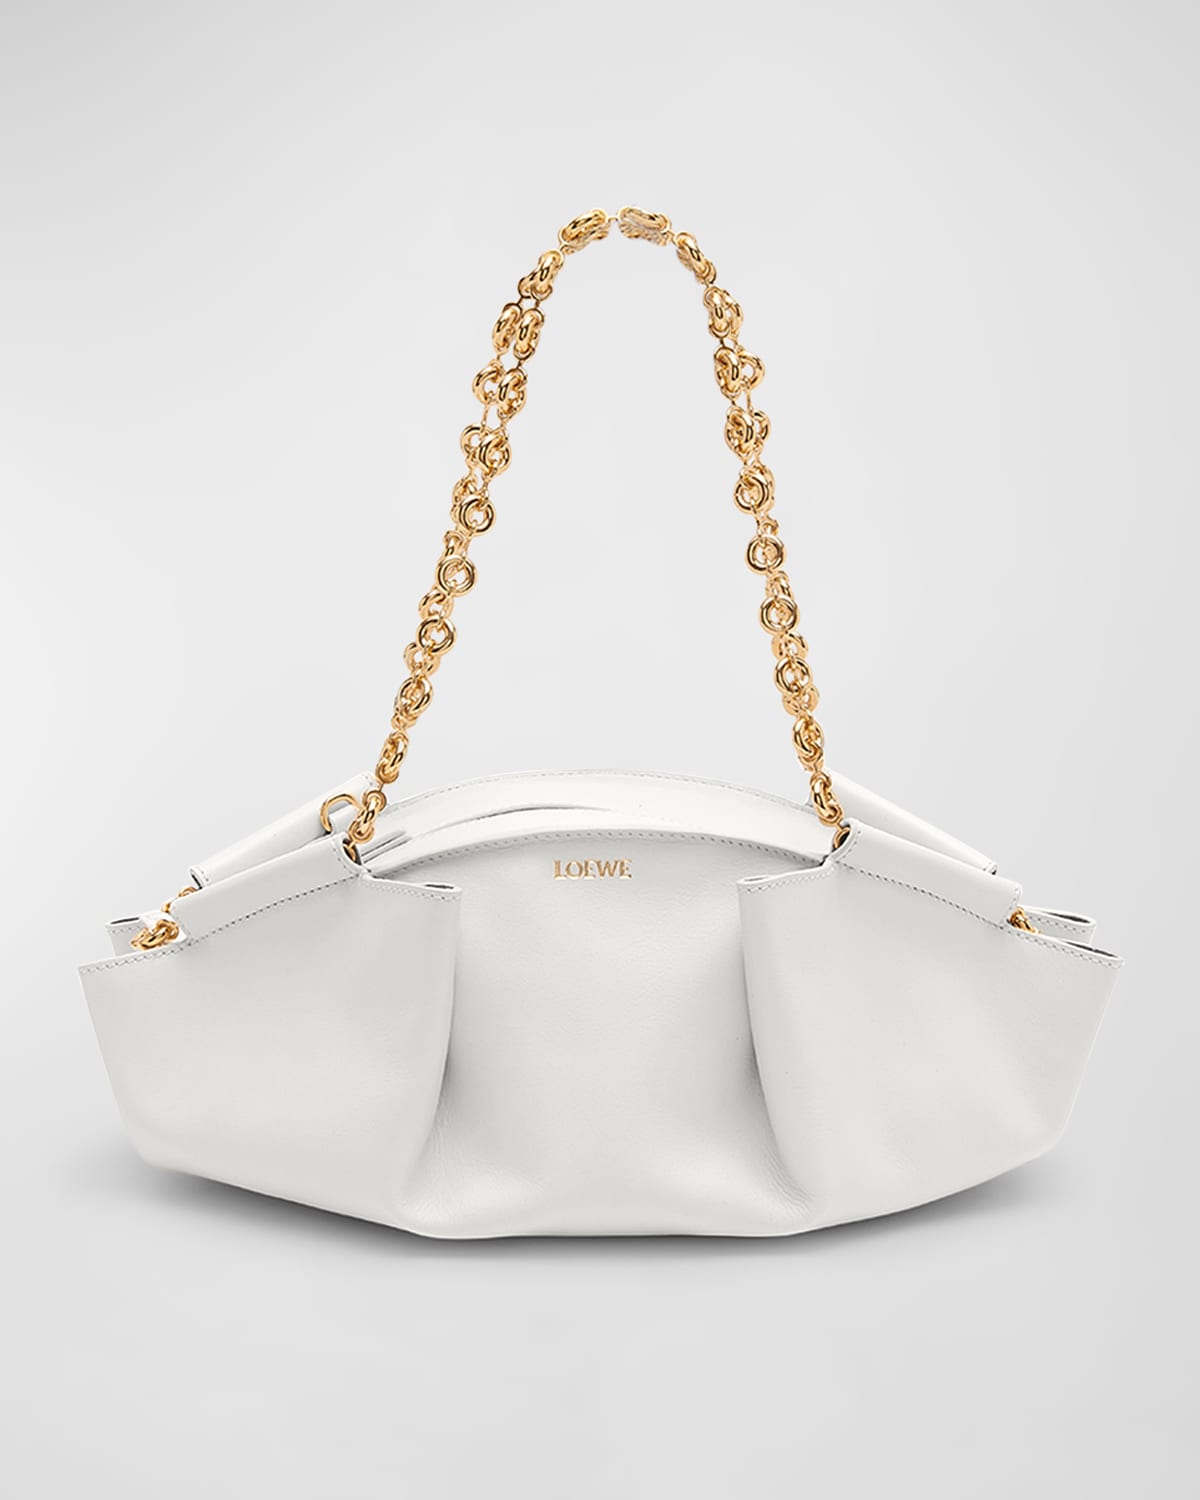 LOEWE PASEO SMALL LEATHER CHAIN SHOULDER BAG